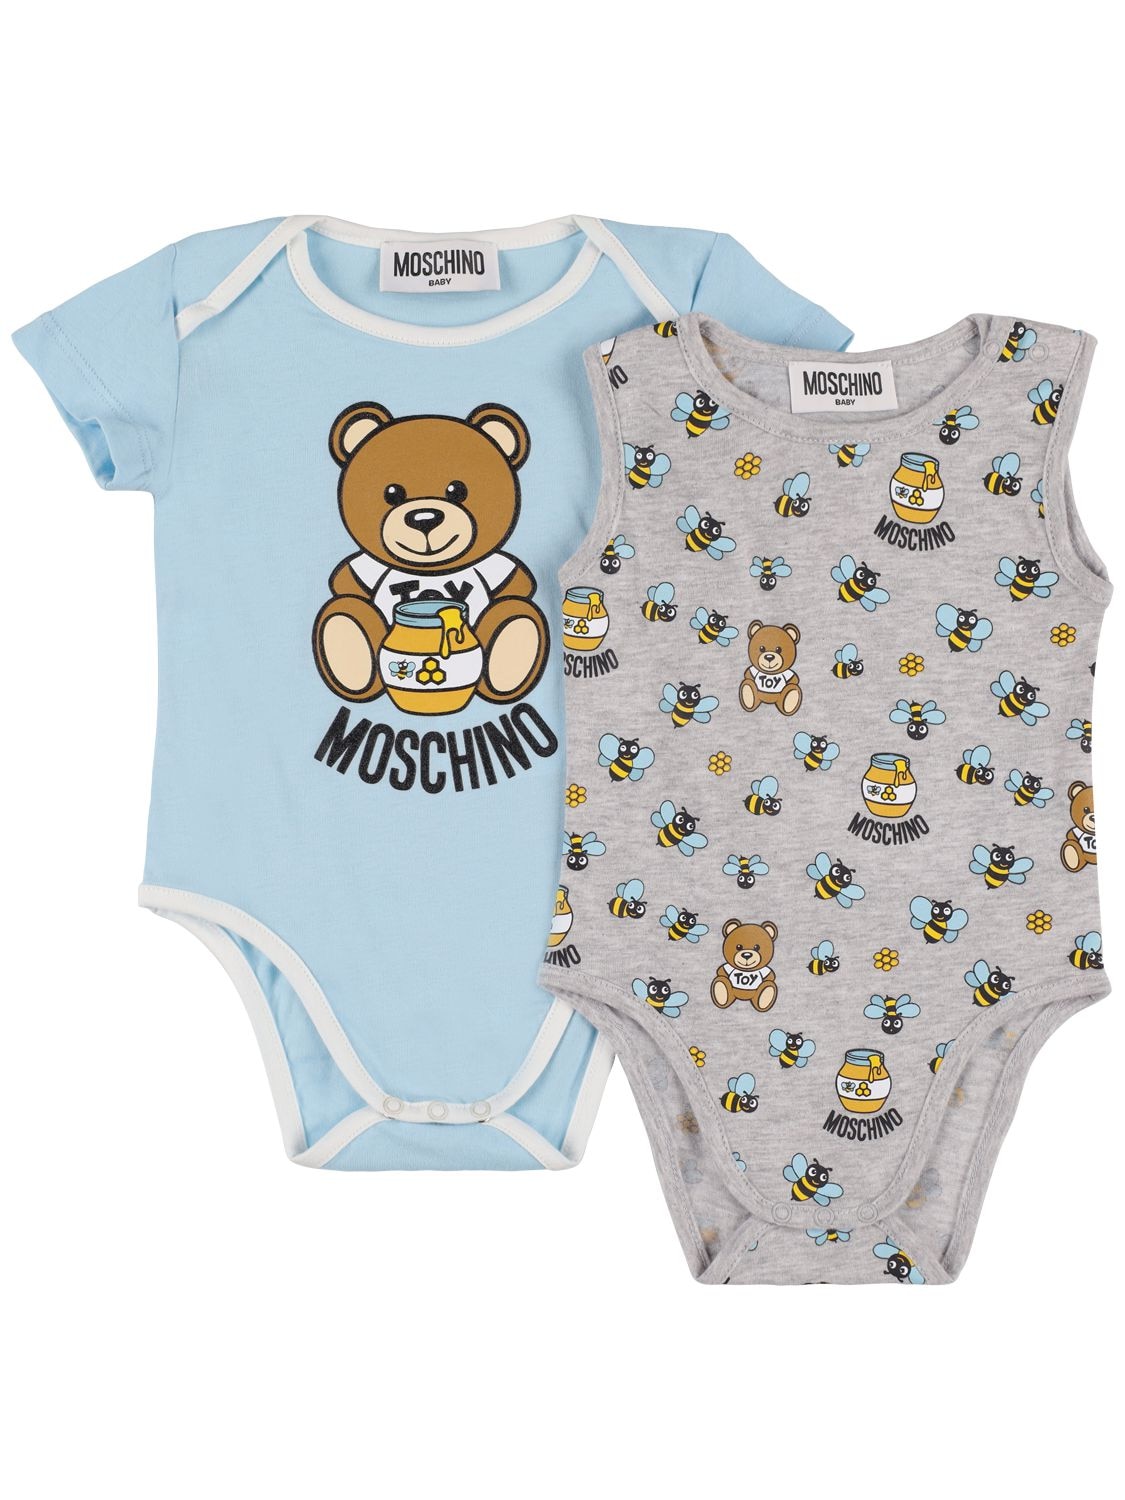 Moschino Babies' Set Of 2 Printed Cotton Bodysuits In Grey,light Blue